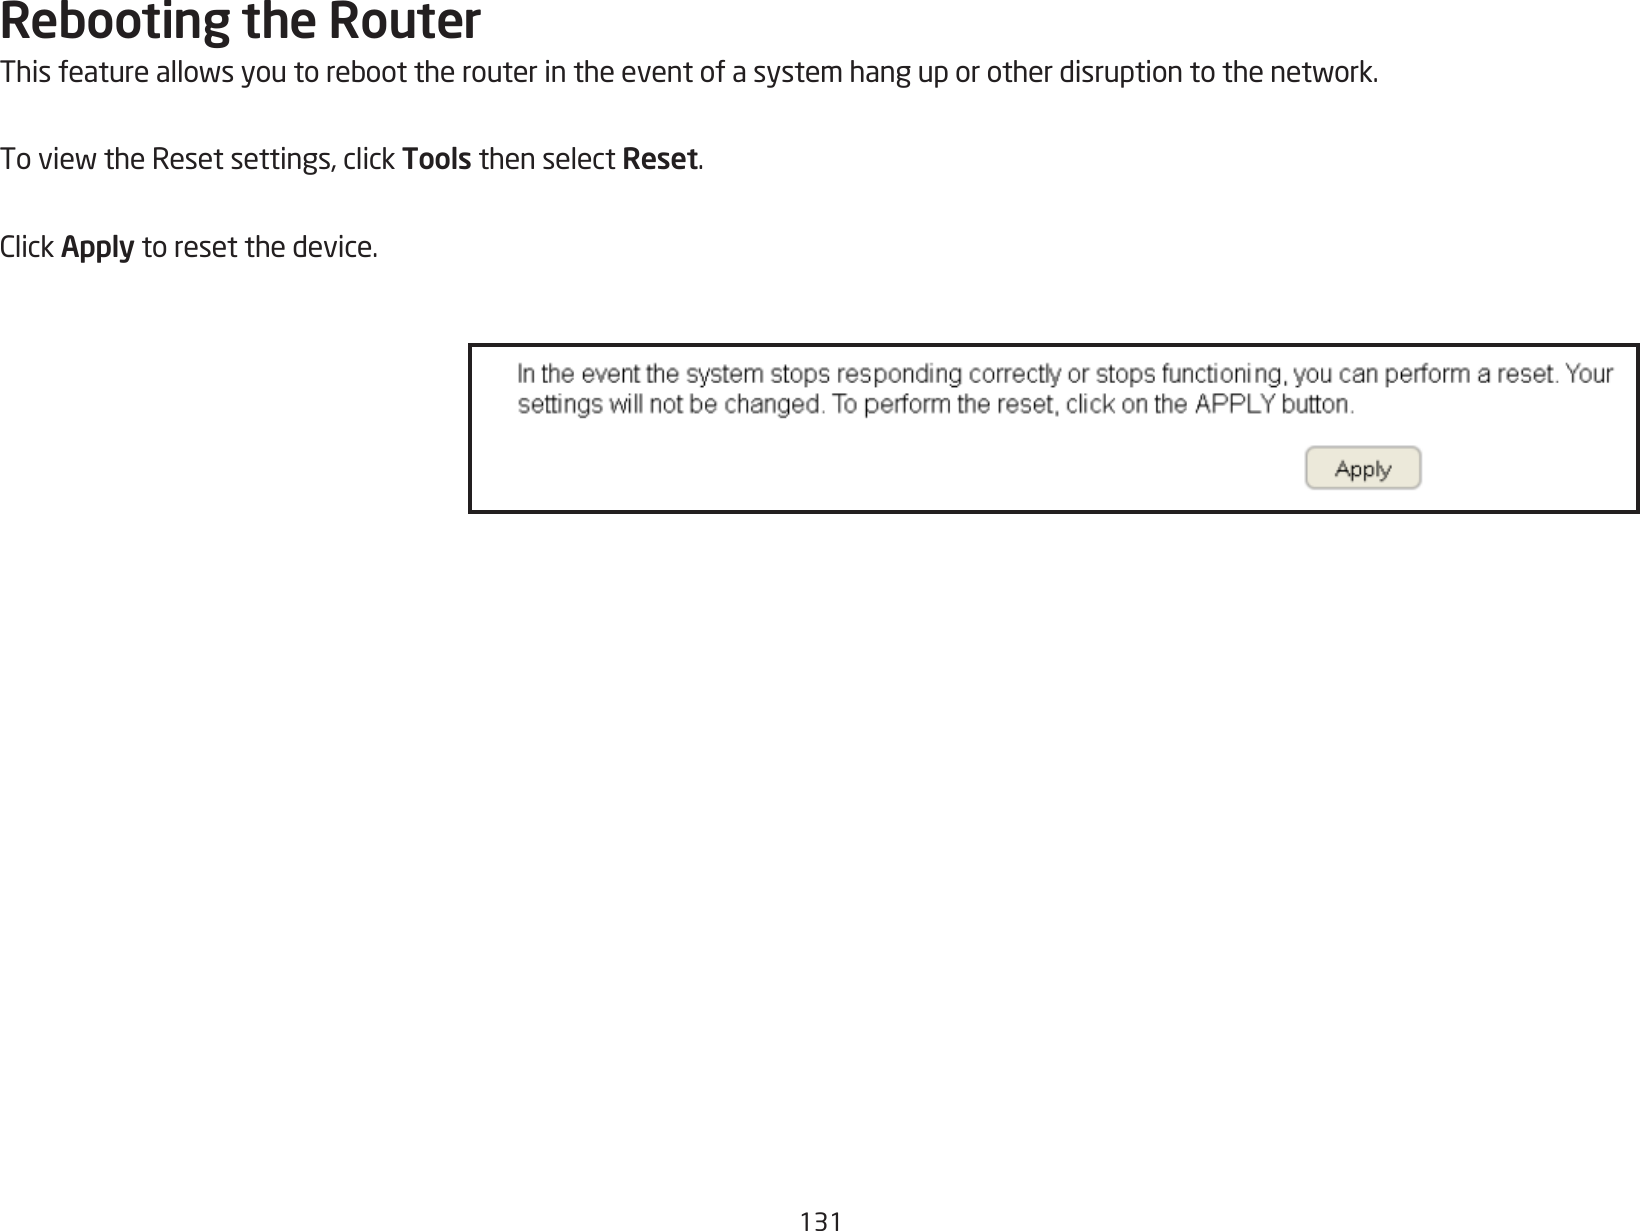 131Rebooting the RouterThisfeatureallowsyoutoreboottherouterintheeventofasystemhanguporotherdisruptiontothenetwork.ToviewtheResetsettings,clickTools then select Reset.ClickApply to reset the device.